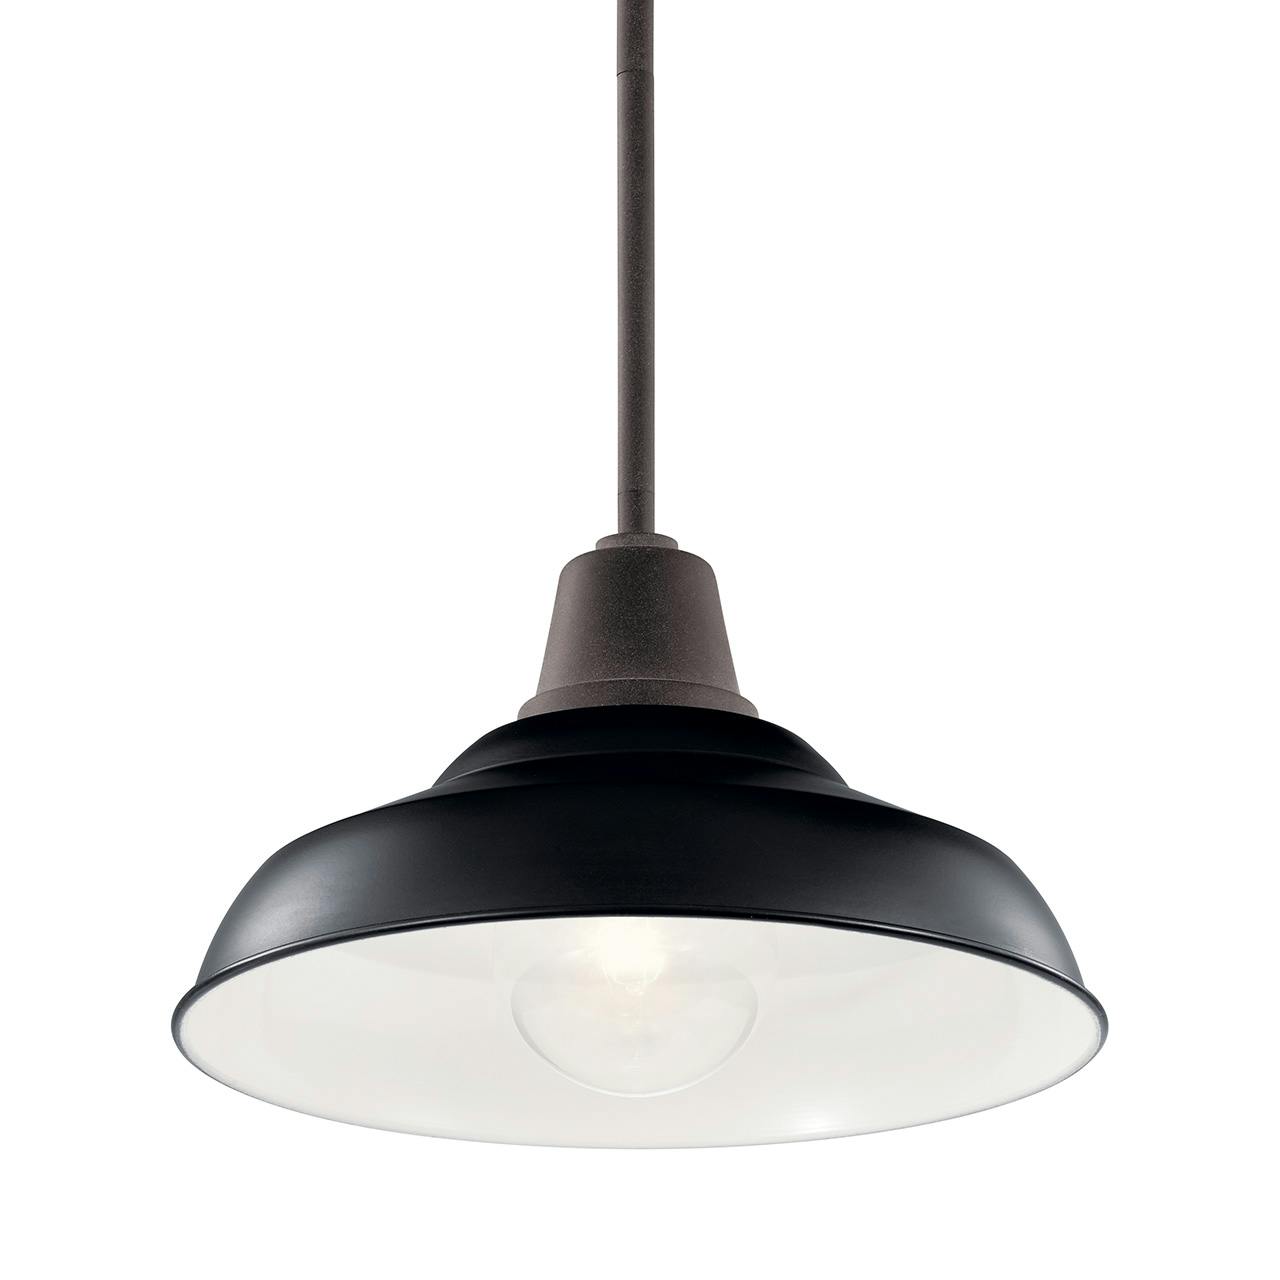 Pier 12" Convertible Pendant Black without the canopy on a white background